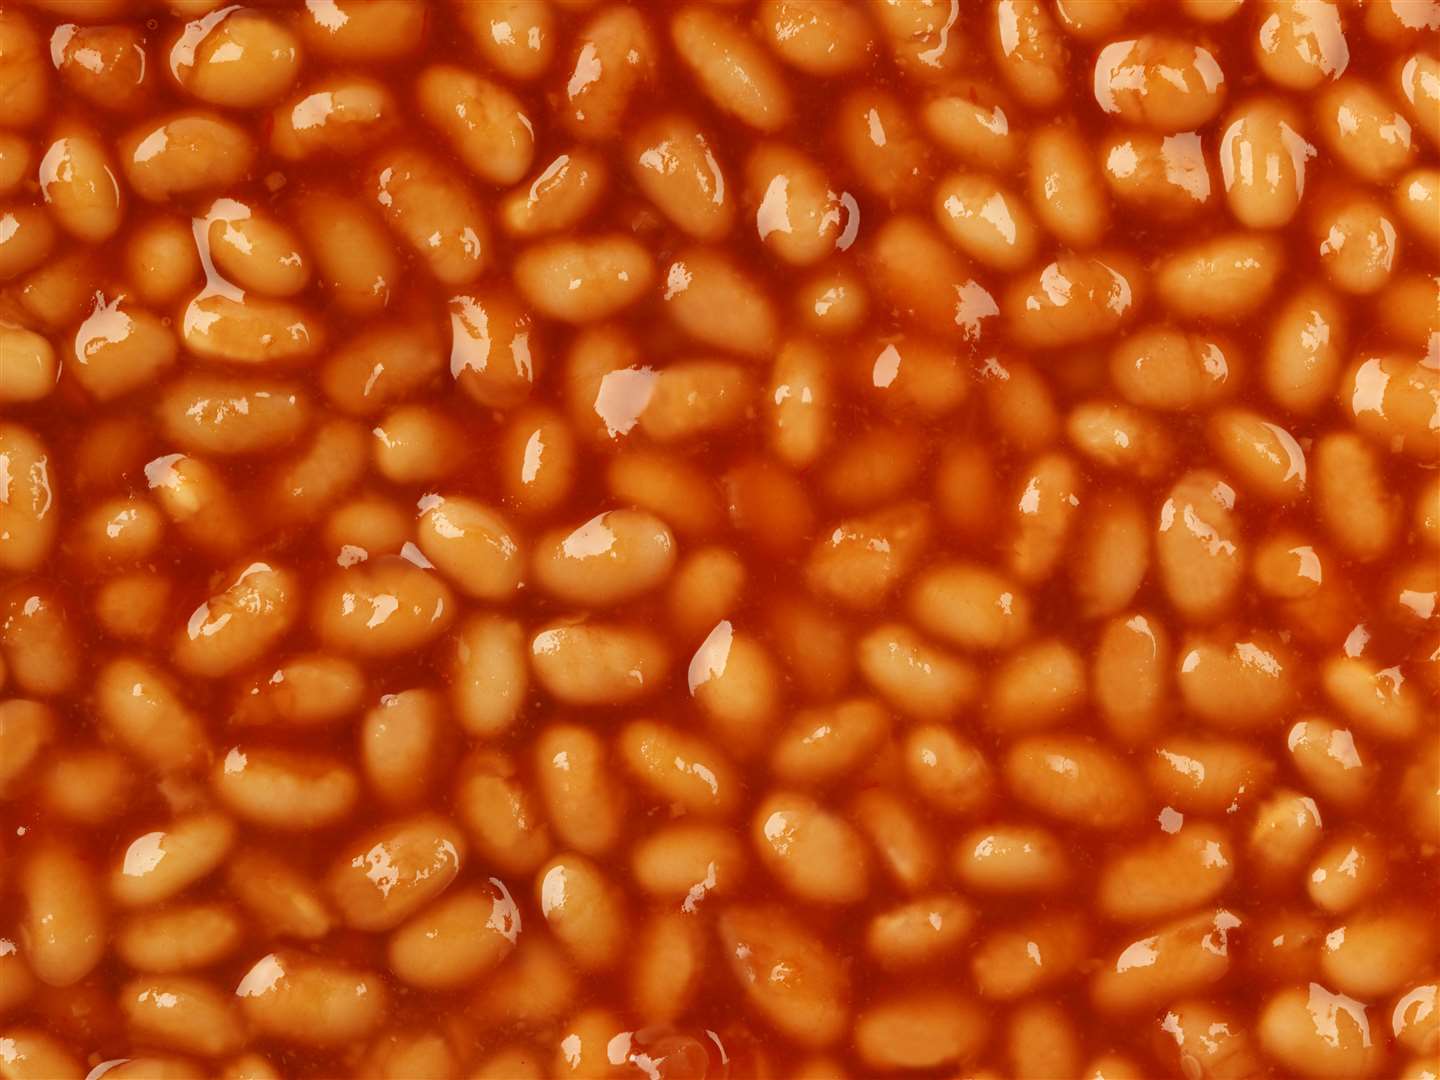 Two police forces in England have already issued warnings about 'beaning'